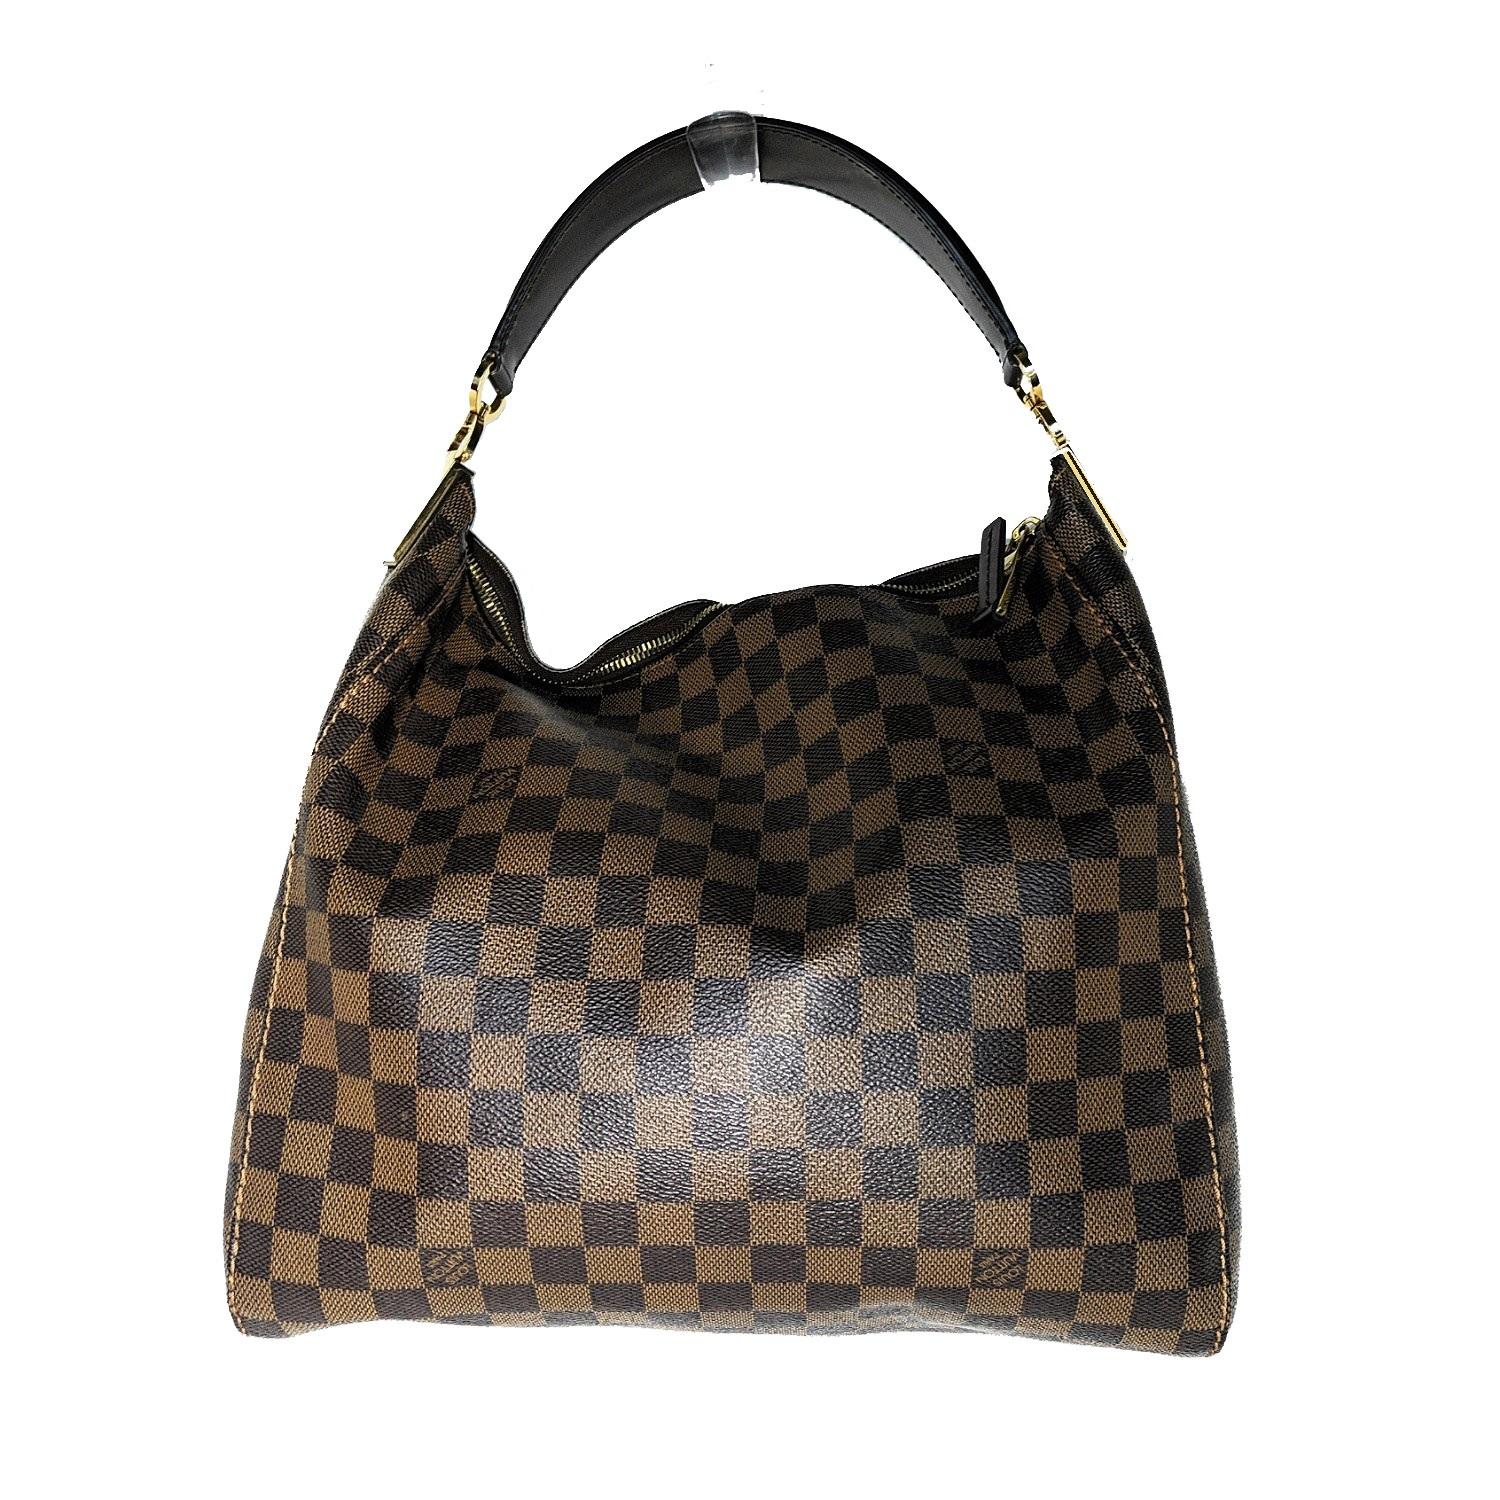 This stylish shoulder bag is finely crafted of Louis Vuitton signature Damier canvas. This bag features a side-to-side looping dark brown leather shoulder strap with polished brass hardware links and a top zipper. The zipper opens to a spacious